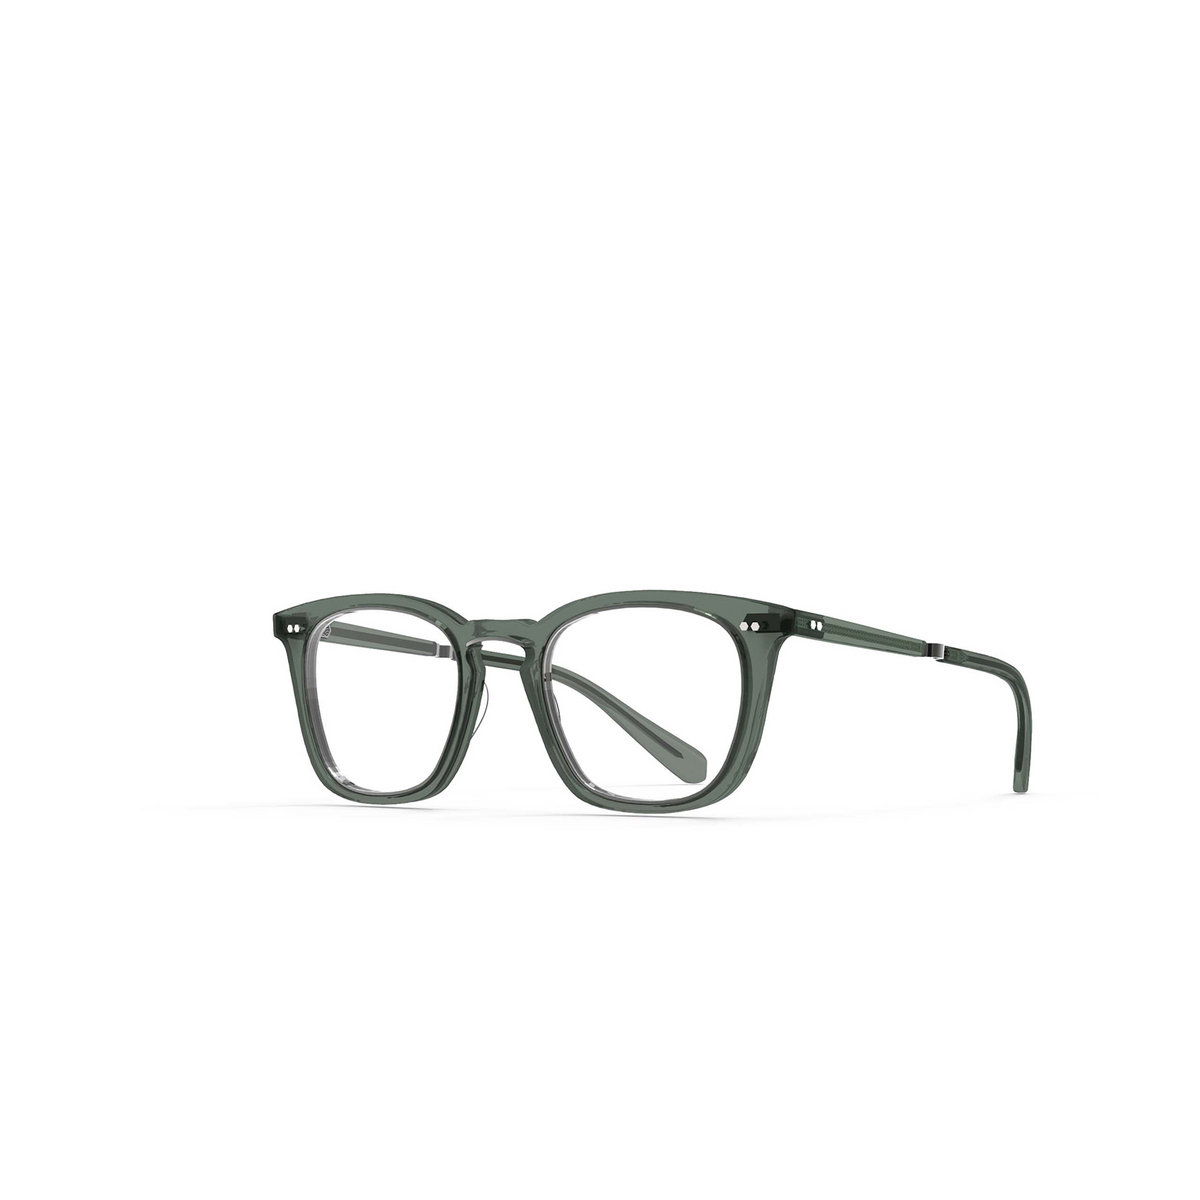 Mr. Leight® Square Eyeglasses: Getty Ii C color Grey Sage-pewter Grys-pw - three-quarters view.